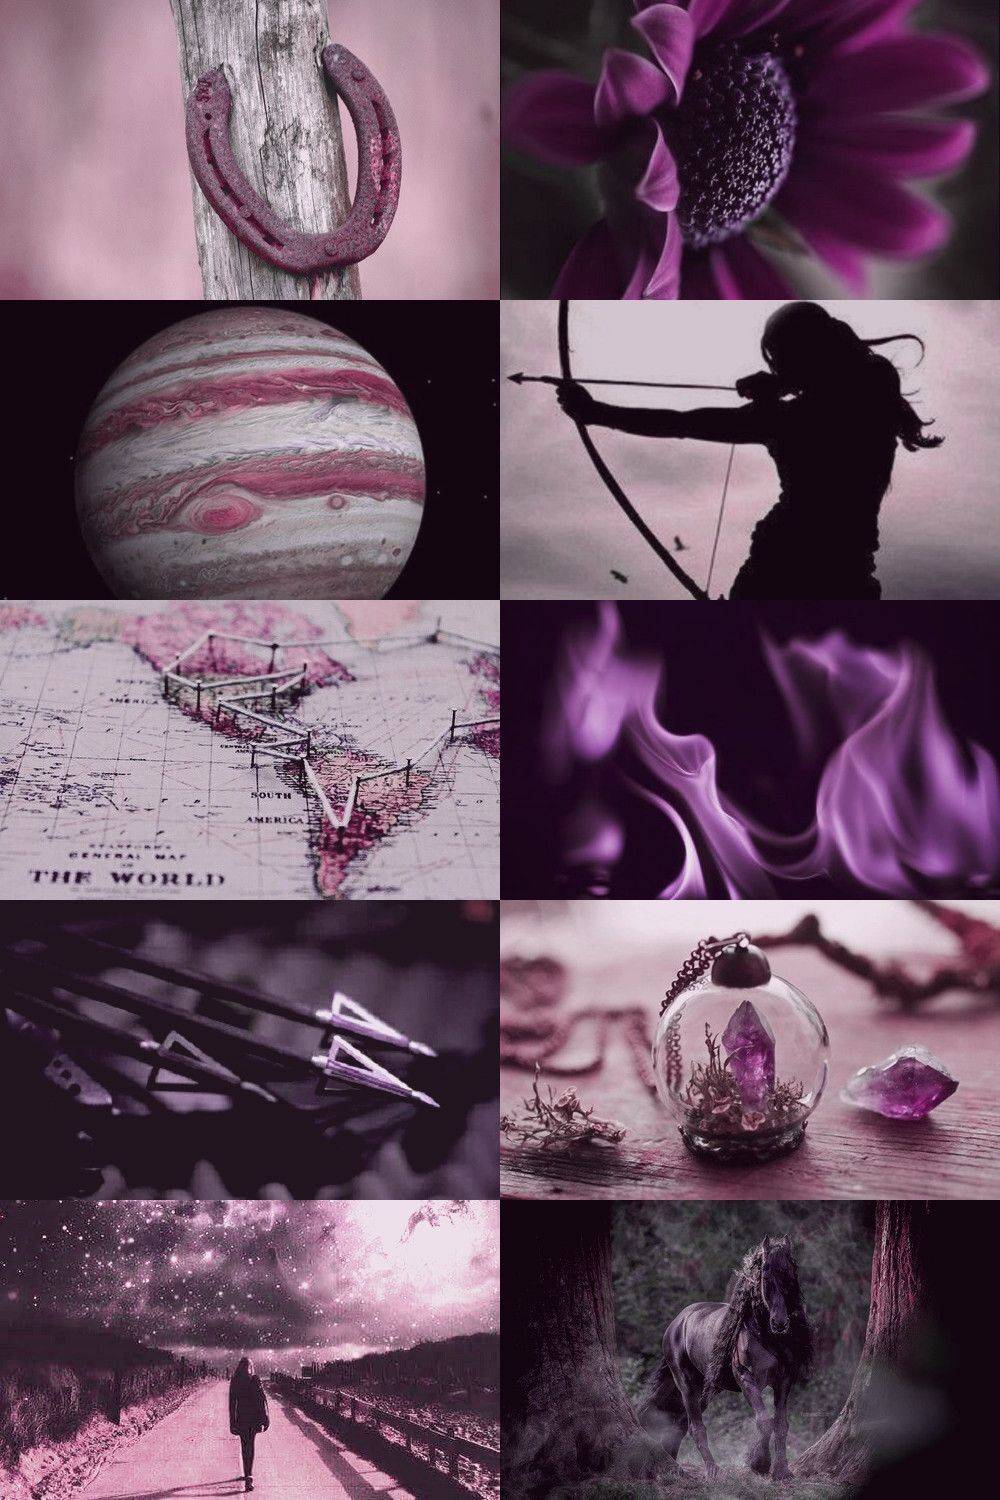 Aesthetic collage of purple images including a horse, a bow and arrow, a map, and a pocket watch. - Sagittarius, Mars